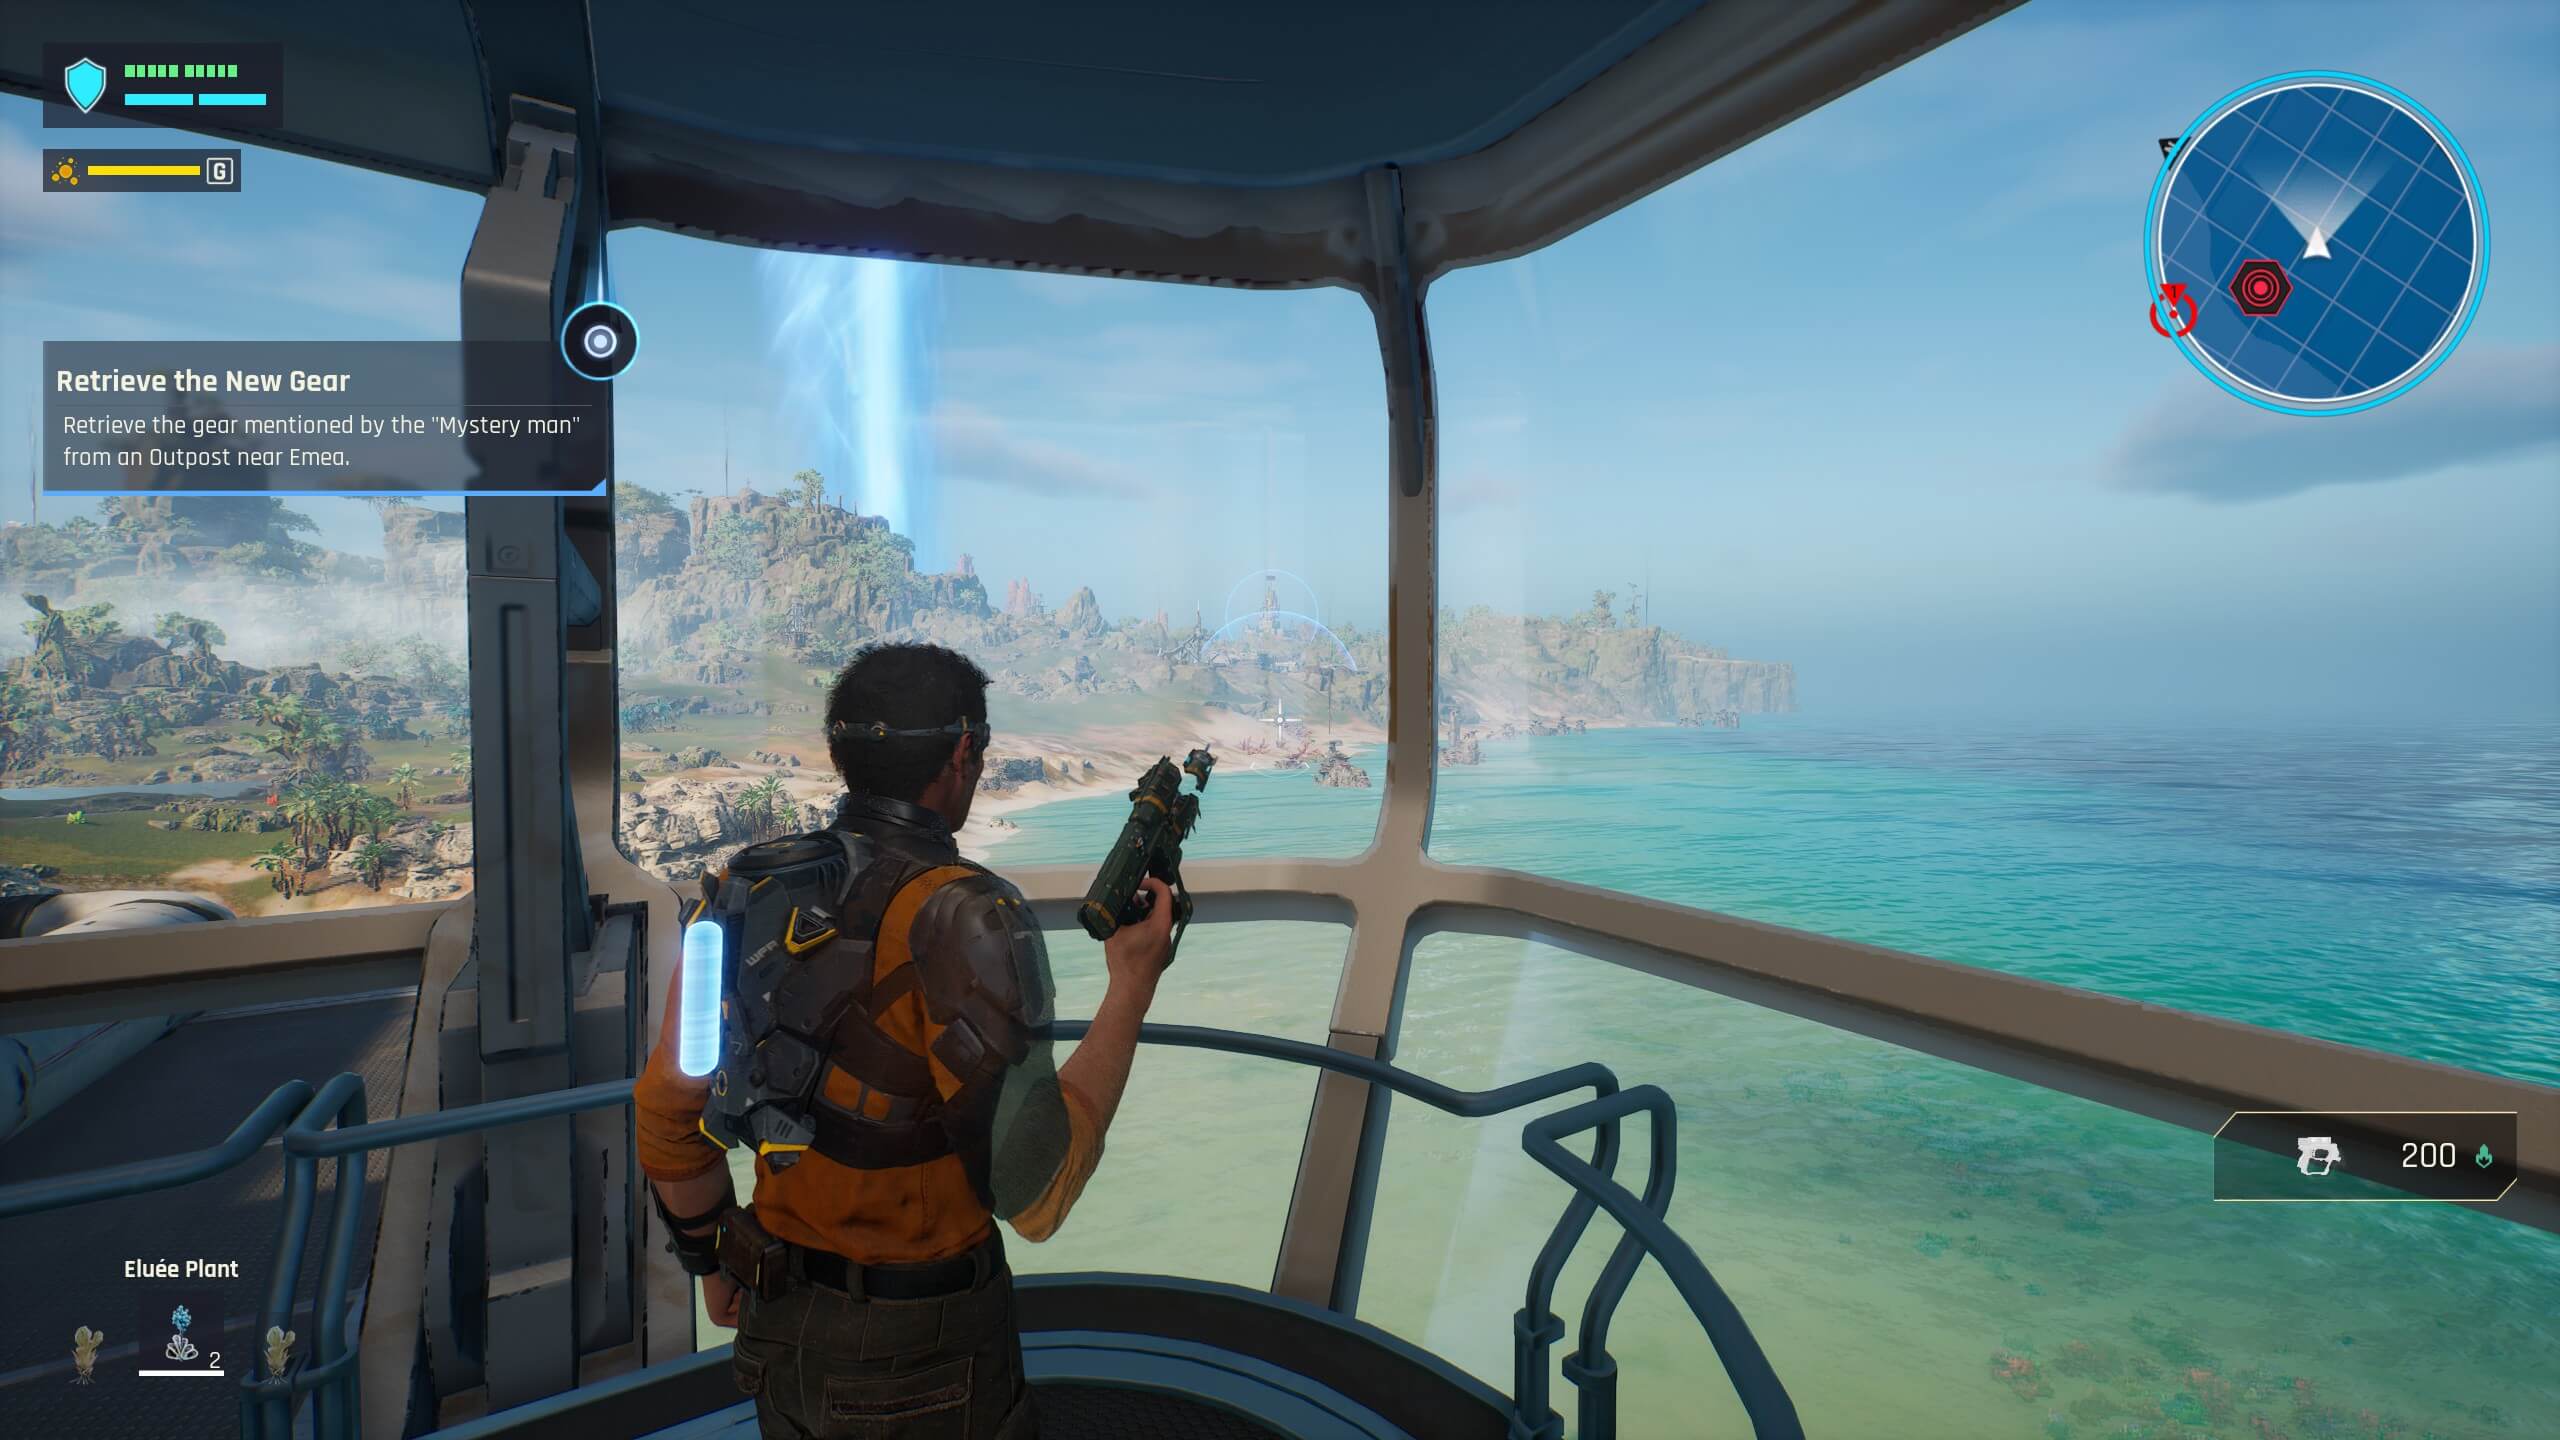 The player is shown within a viewport of a base, overlooking a vast shoreline. A large vertical beam can be observed in the distance going up and into the sky.